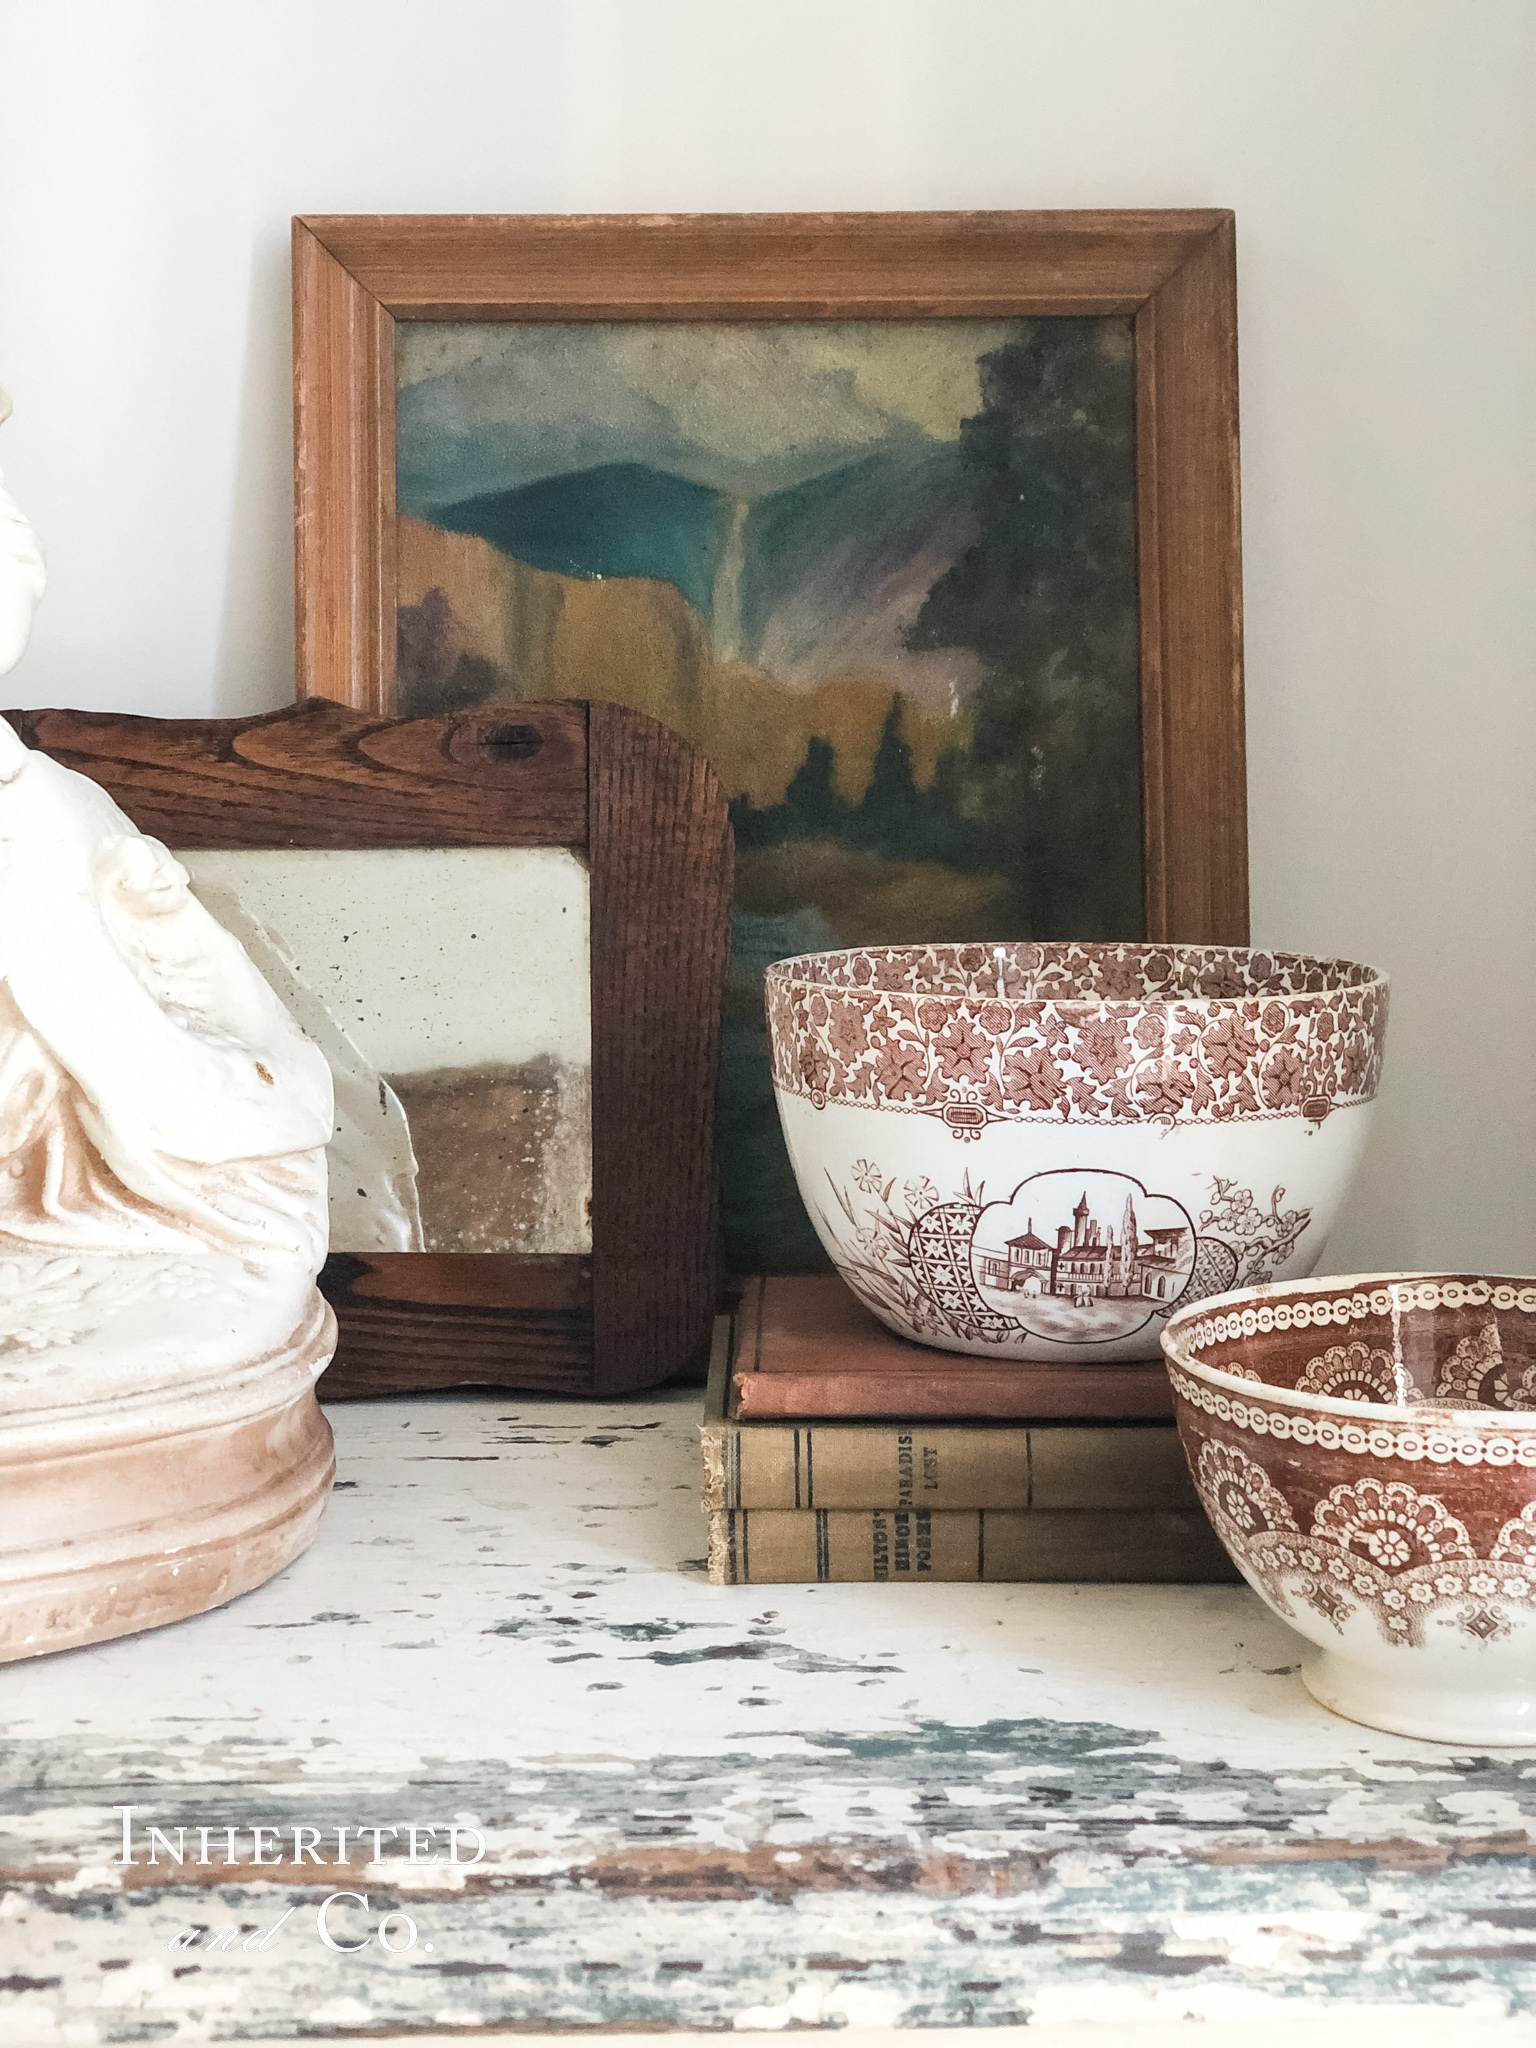 Antique vignette with a muted oil painting and small oak mirror in the background of two brown transferware bowls and a stack of books